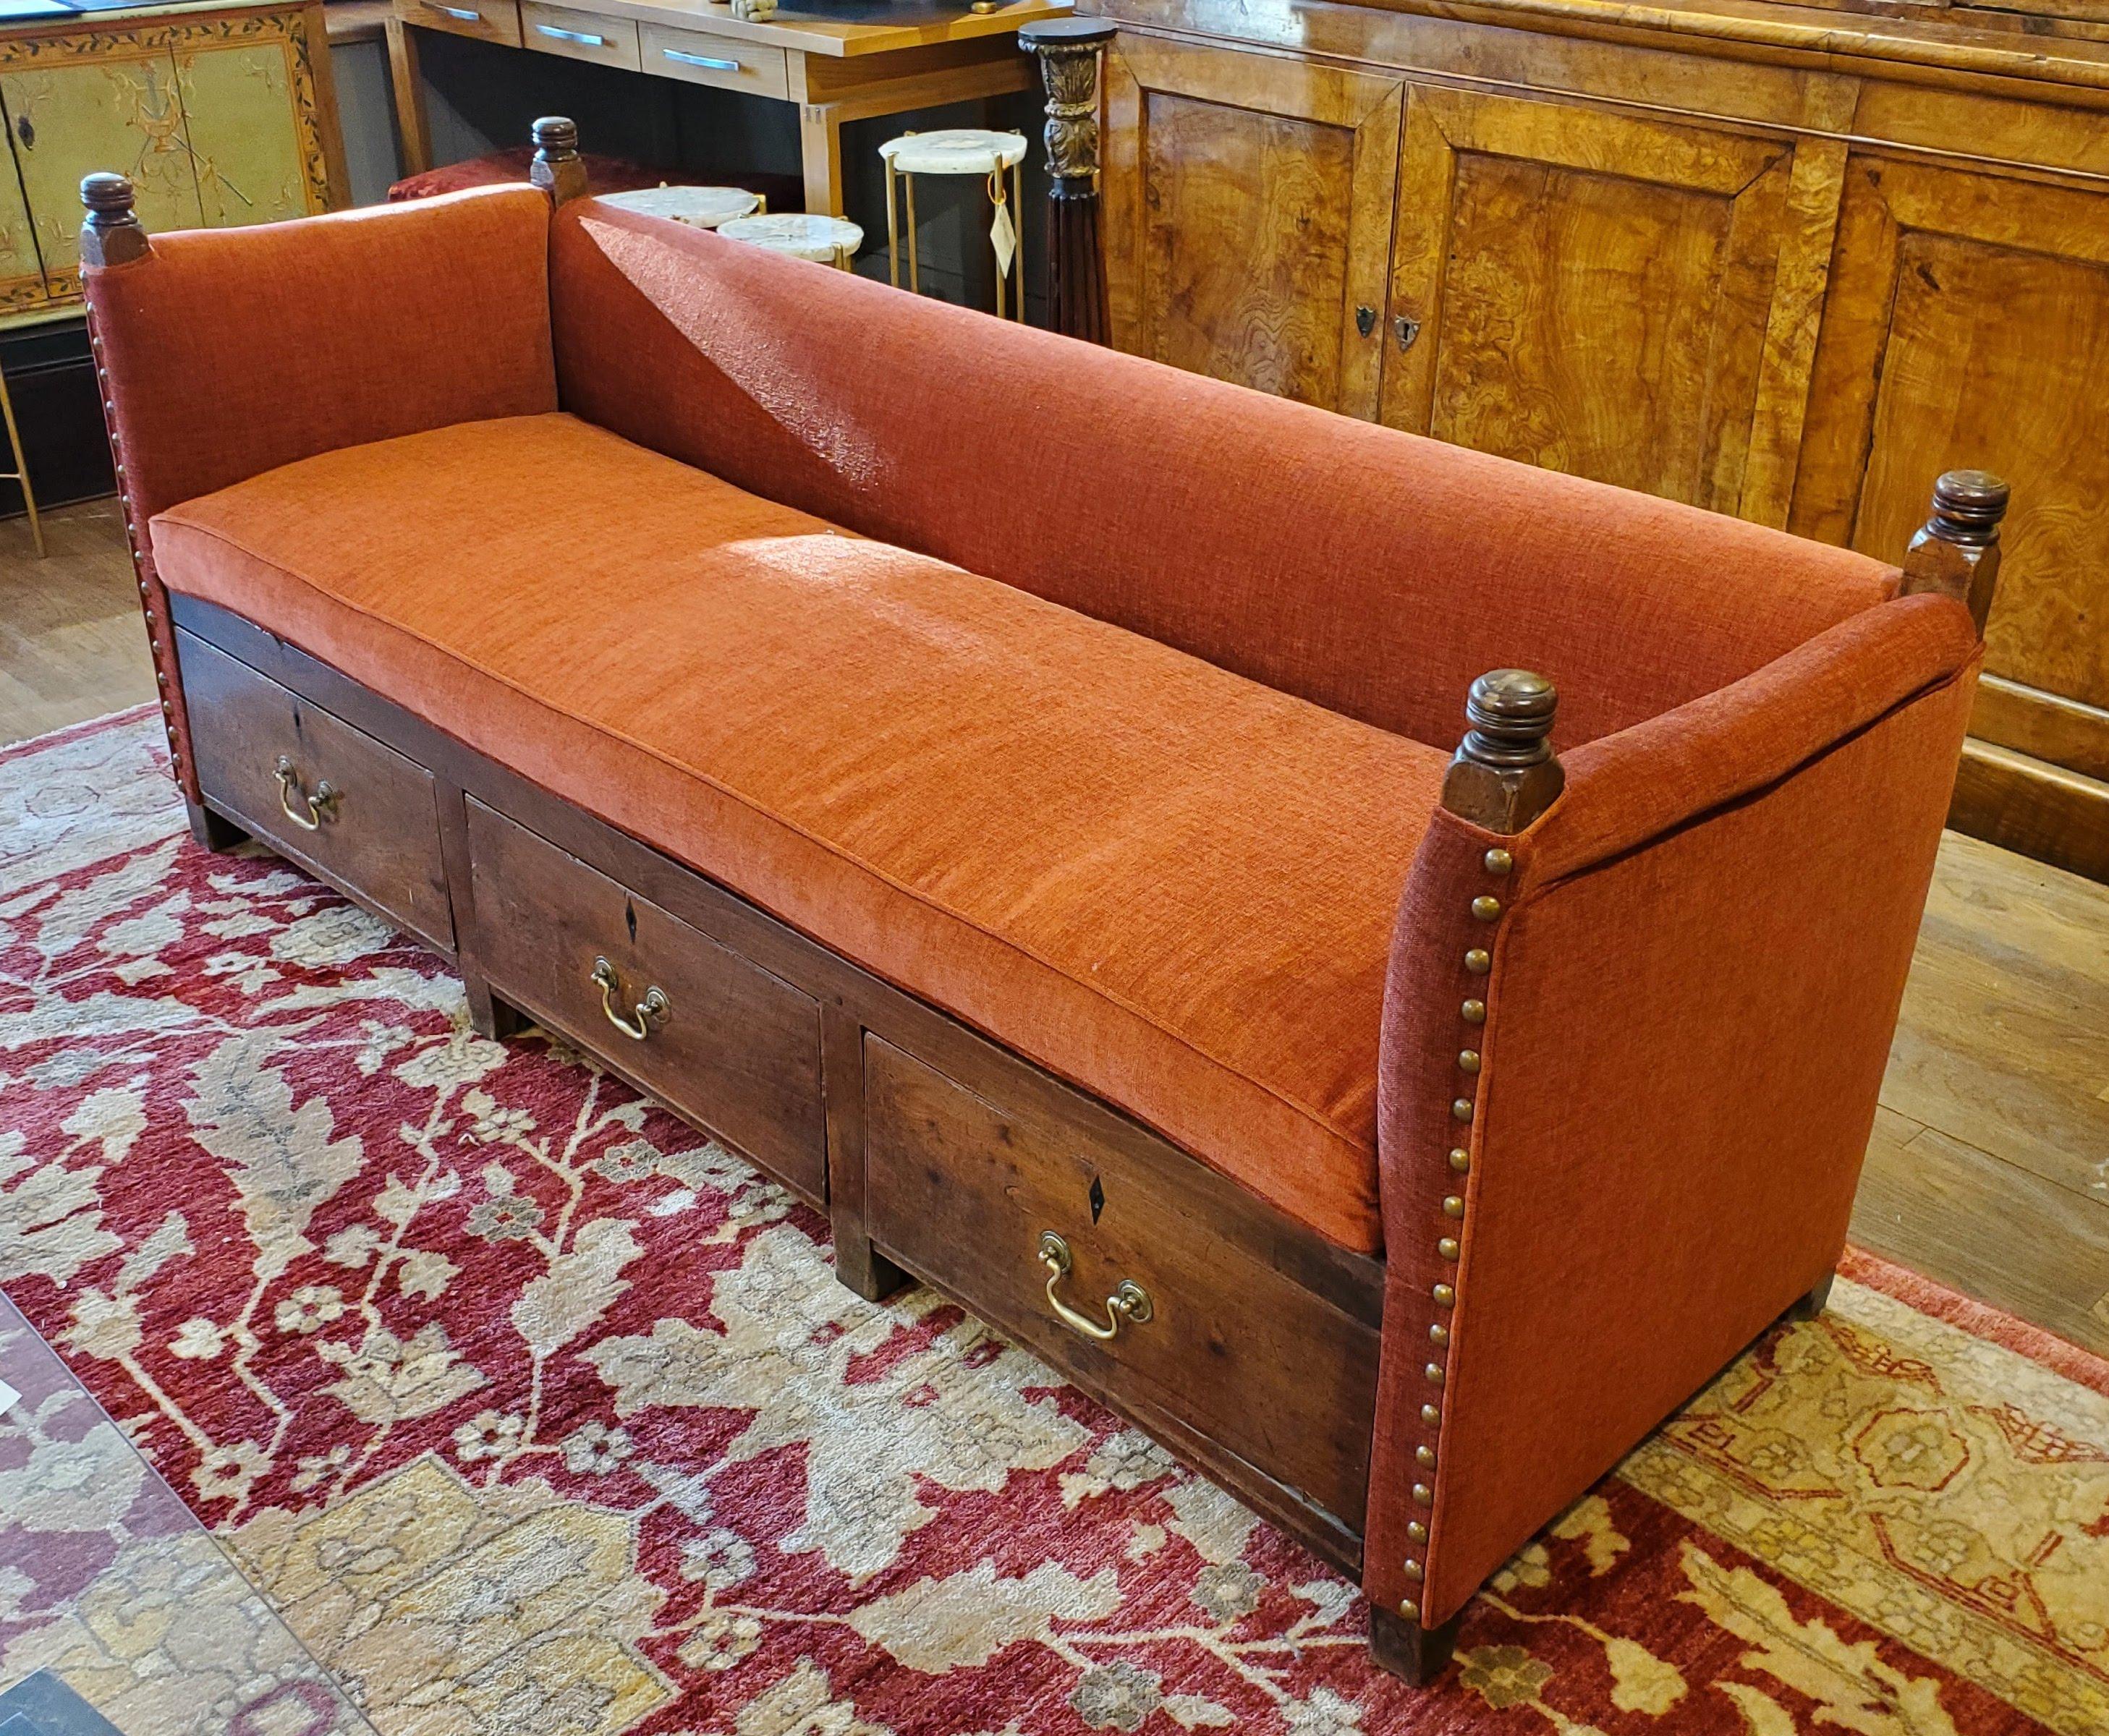 This unusual 19th century English upholstered bench is a stunner. Made of richly patinated oak with three drawers, four turned posts and original brass hardware. Recently reupholstered in a soft persimmon fabric with large brass nailhead decoration.